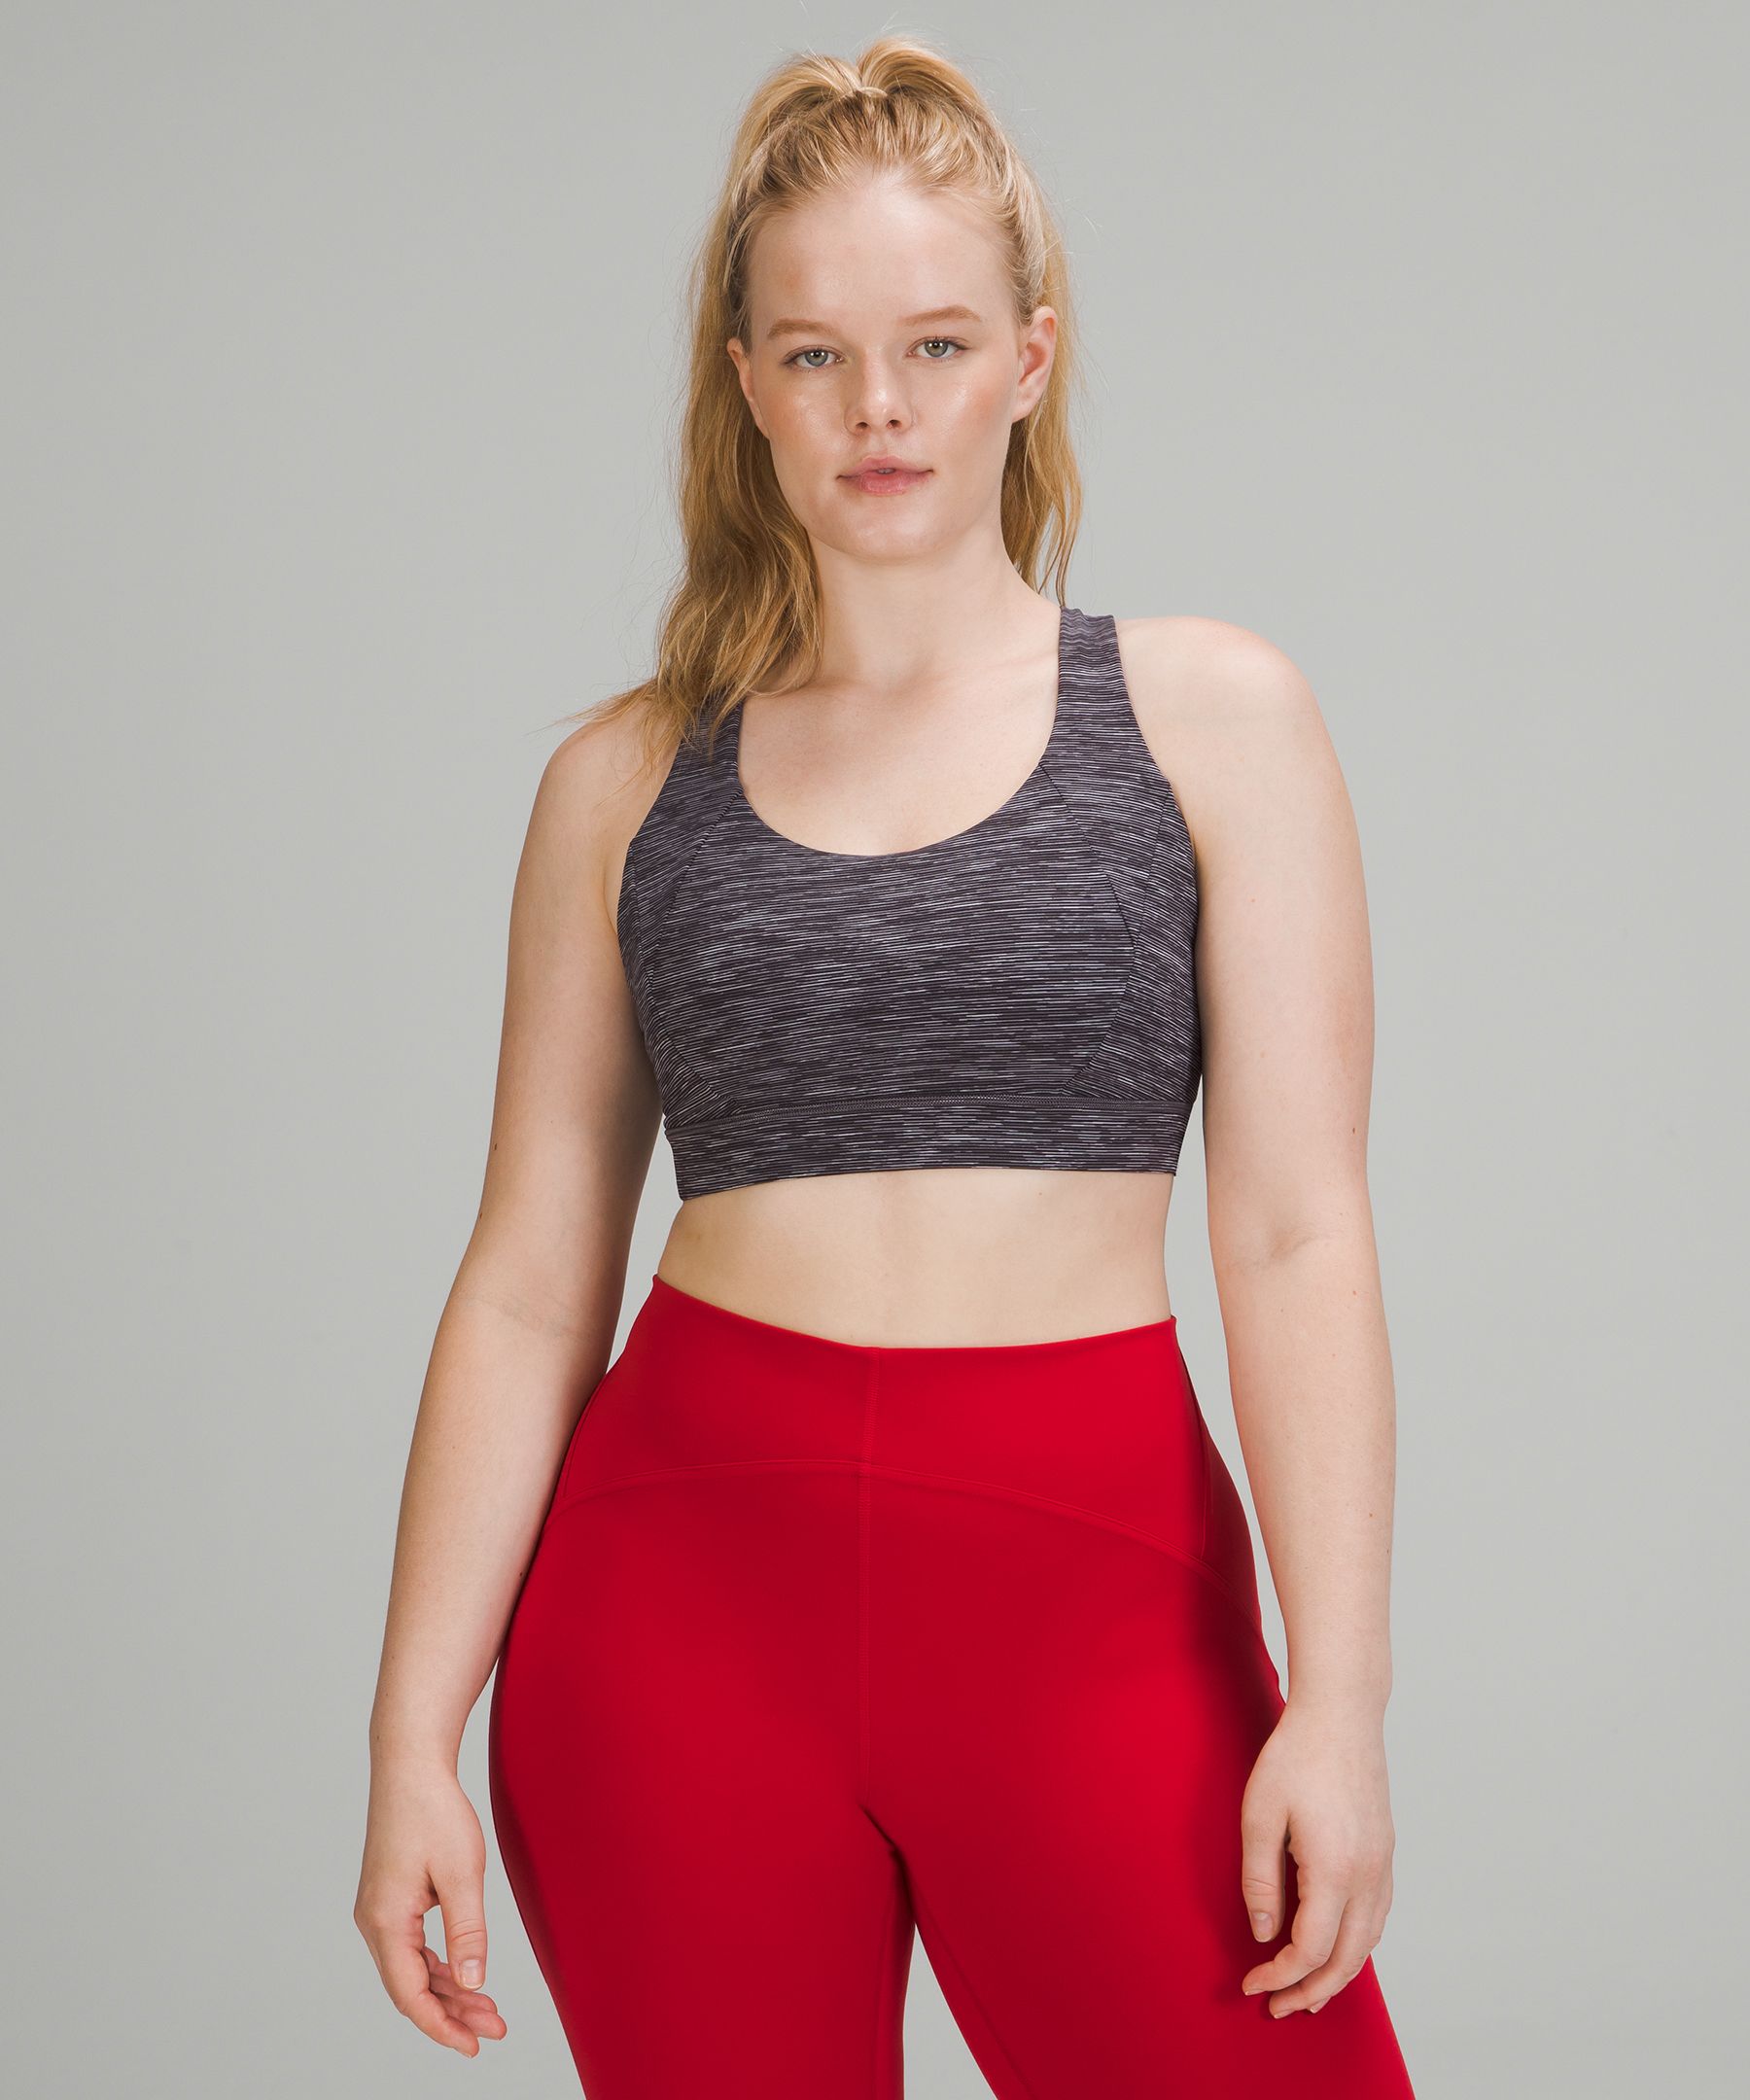 Lululemon Free To Be Elevated Bra Light Support, Dd/ddd(e) Cup In Wee Are From Space Dark Carbon Ice Grey/dark Red